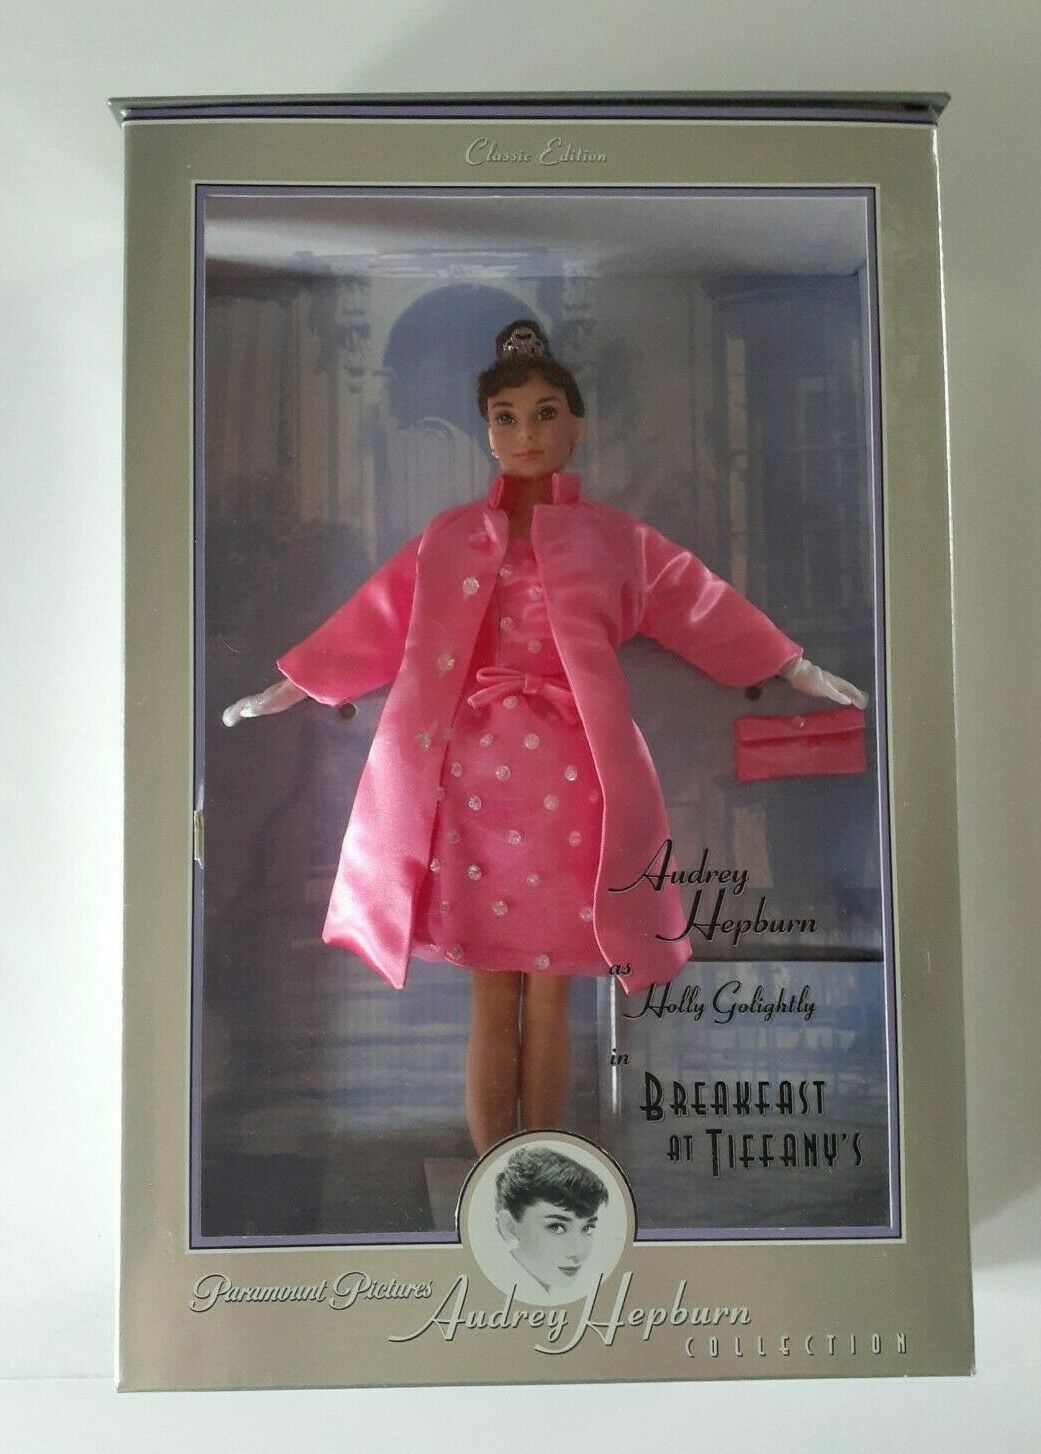 Barbie Doll As Audrey Hepburn In Breakfast At Tiffany’s, Pink Princess Fashion